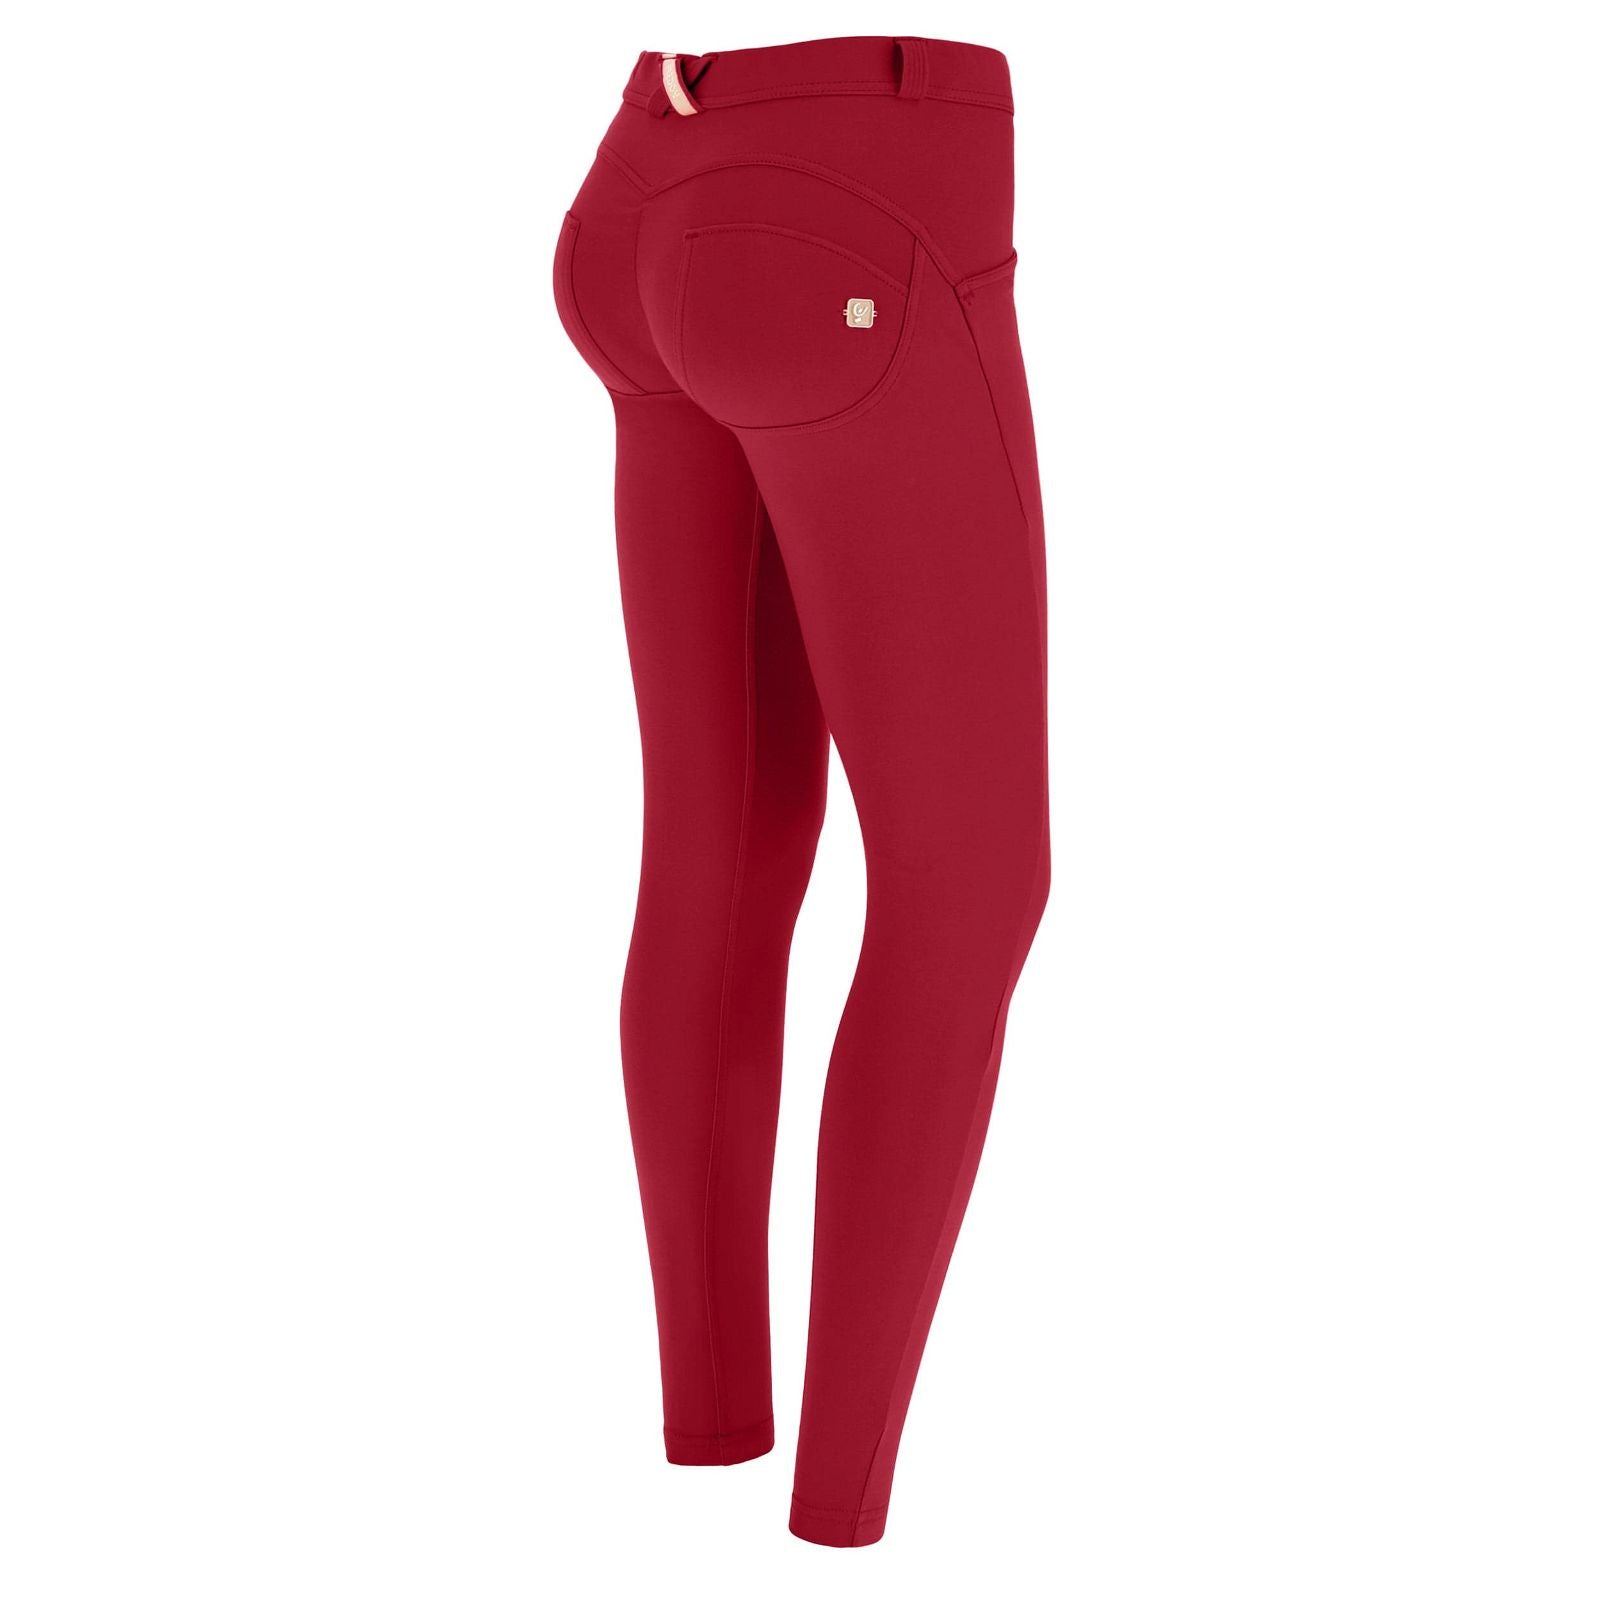 WR.UP® Fashion - Mid Rise - Full Length - Chili Pepper 1